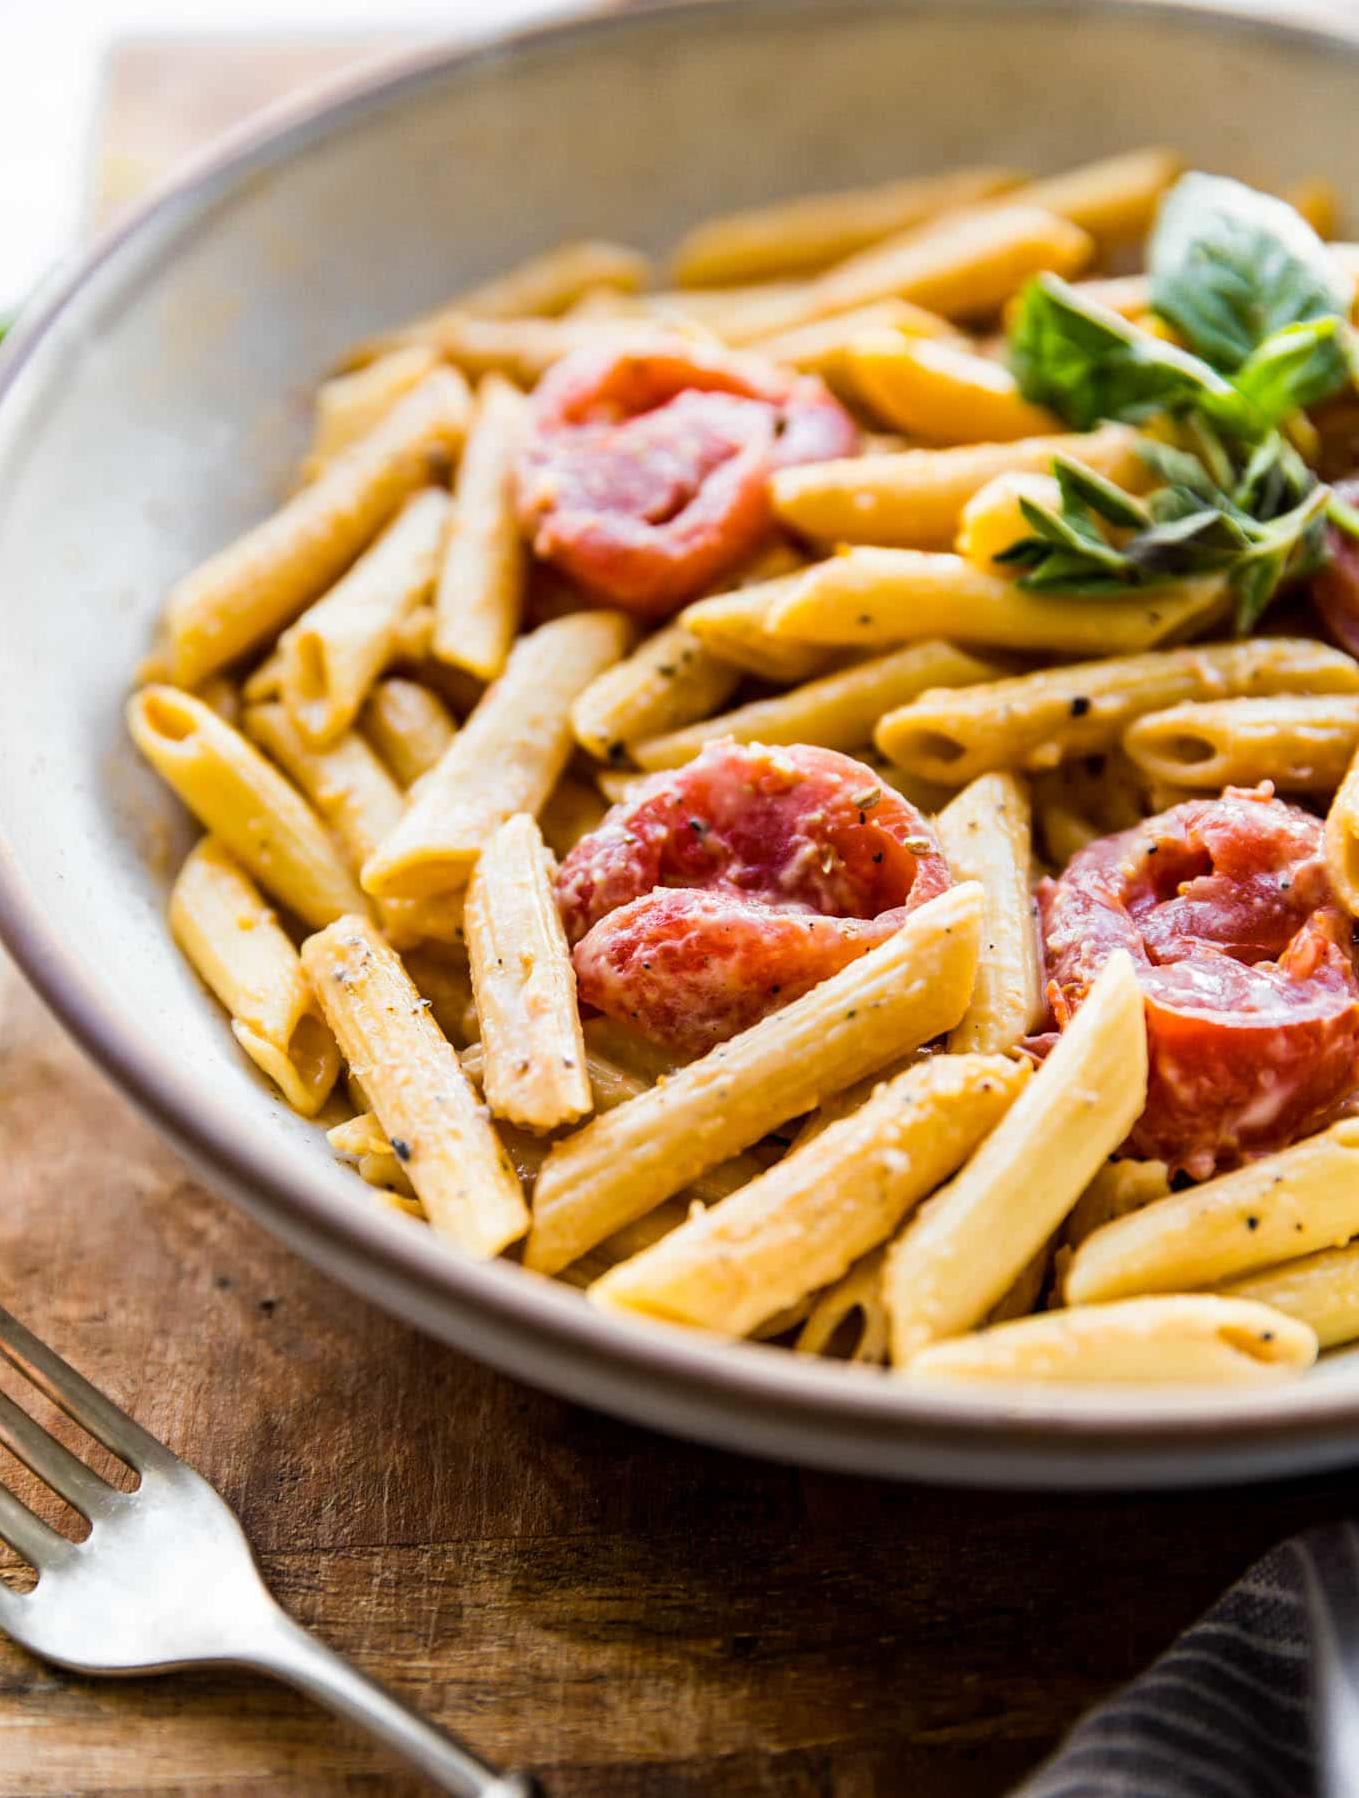  With a blend of fresh ingredients and delightful spices, this pasta sauce is a game-changer.